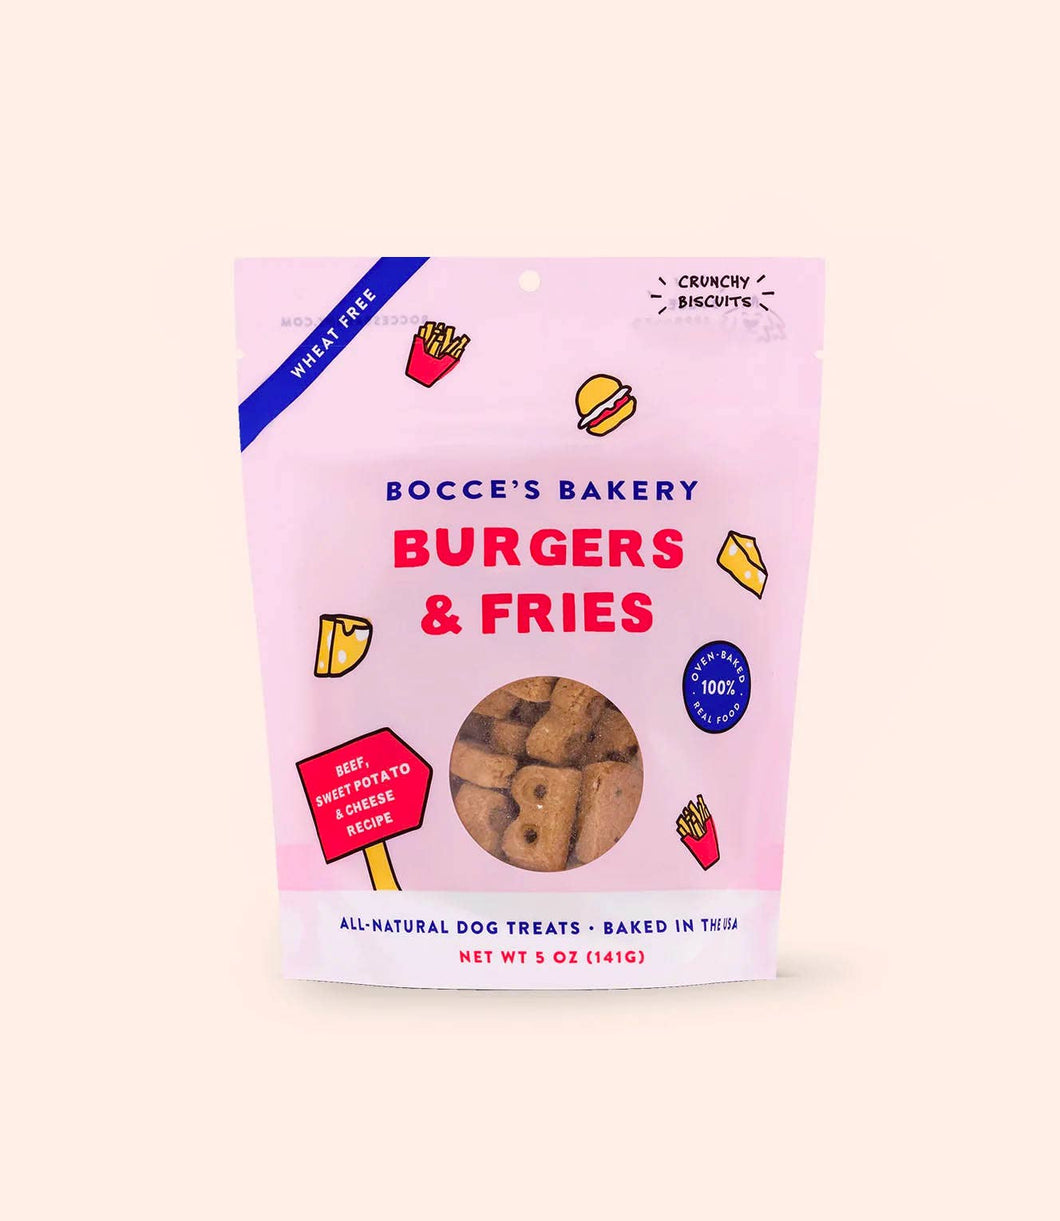 Bocce's Bakery Burgers & Fries 5oz Biscuits Dog Treats